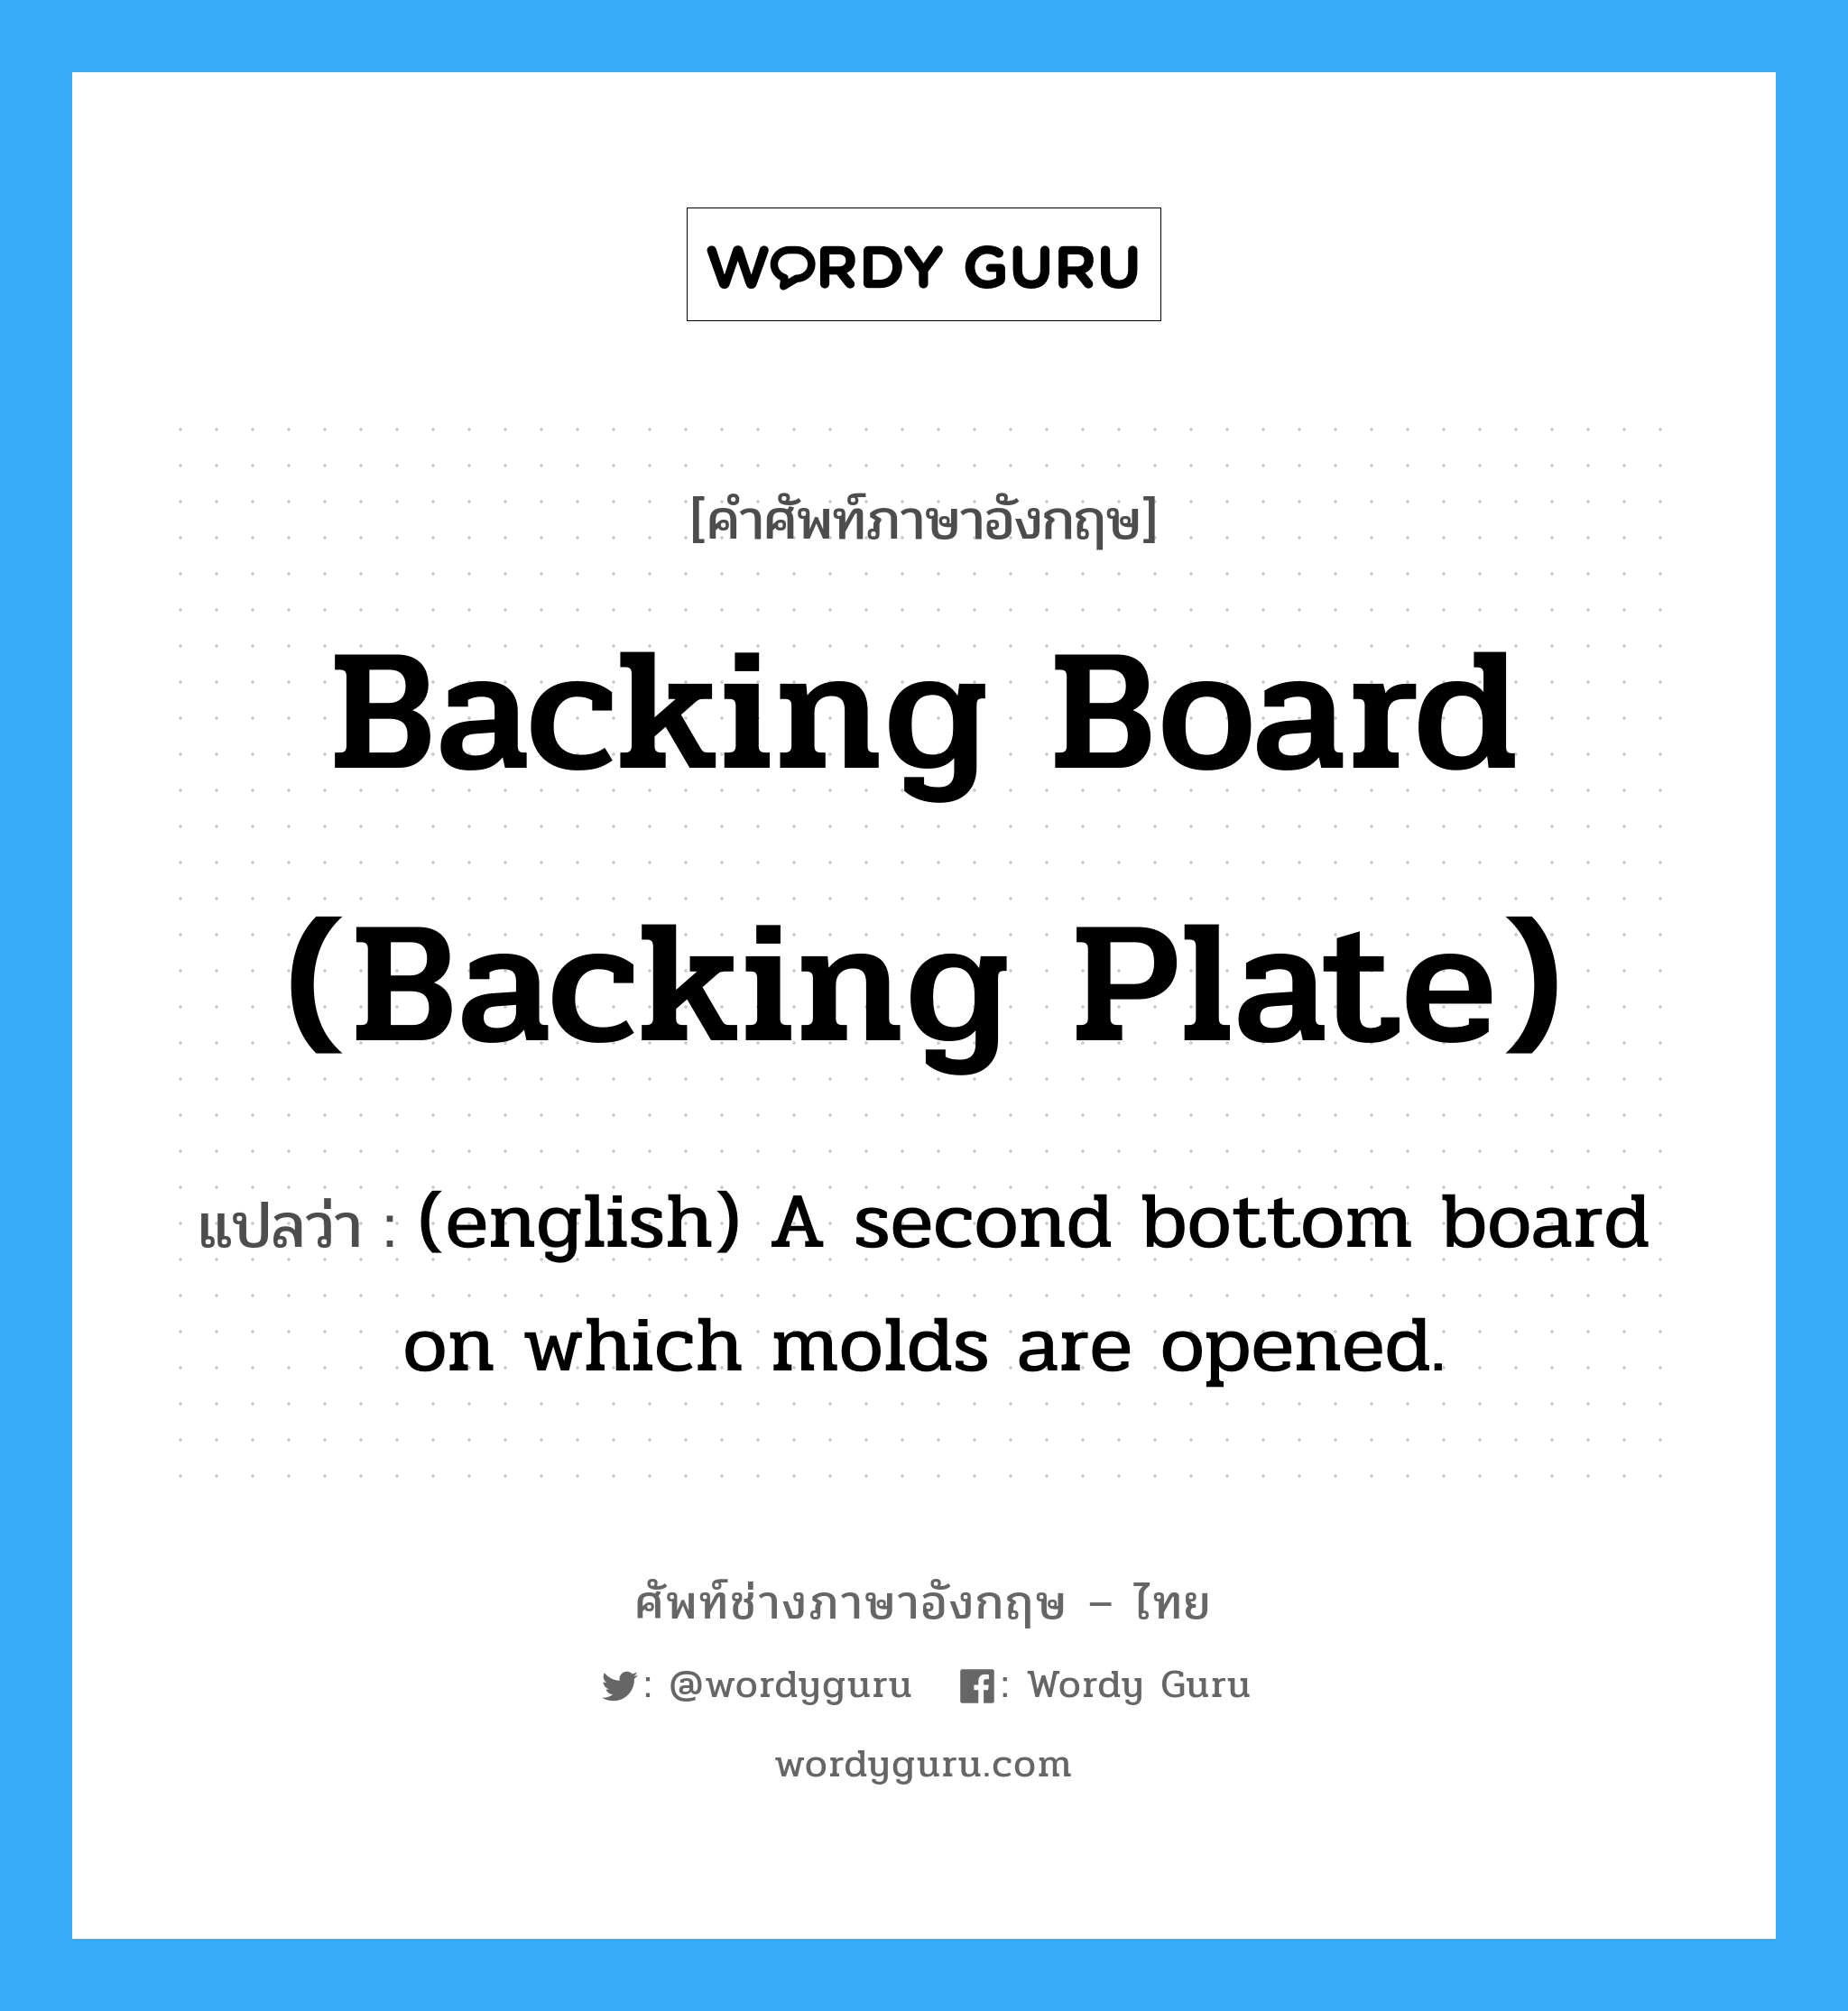 Backing Board (Backing Plate) แปลว่า?, คำศัพท์ช่างภาษาอังกฤษ - ไทย Backing Board (Backing Plate) คำศัพท์ภาษาอังกฤษ Backing Board (Backing Plate) แปลว่า (english) A second bottom board on which molds are opened.